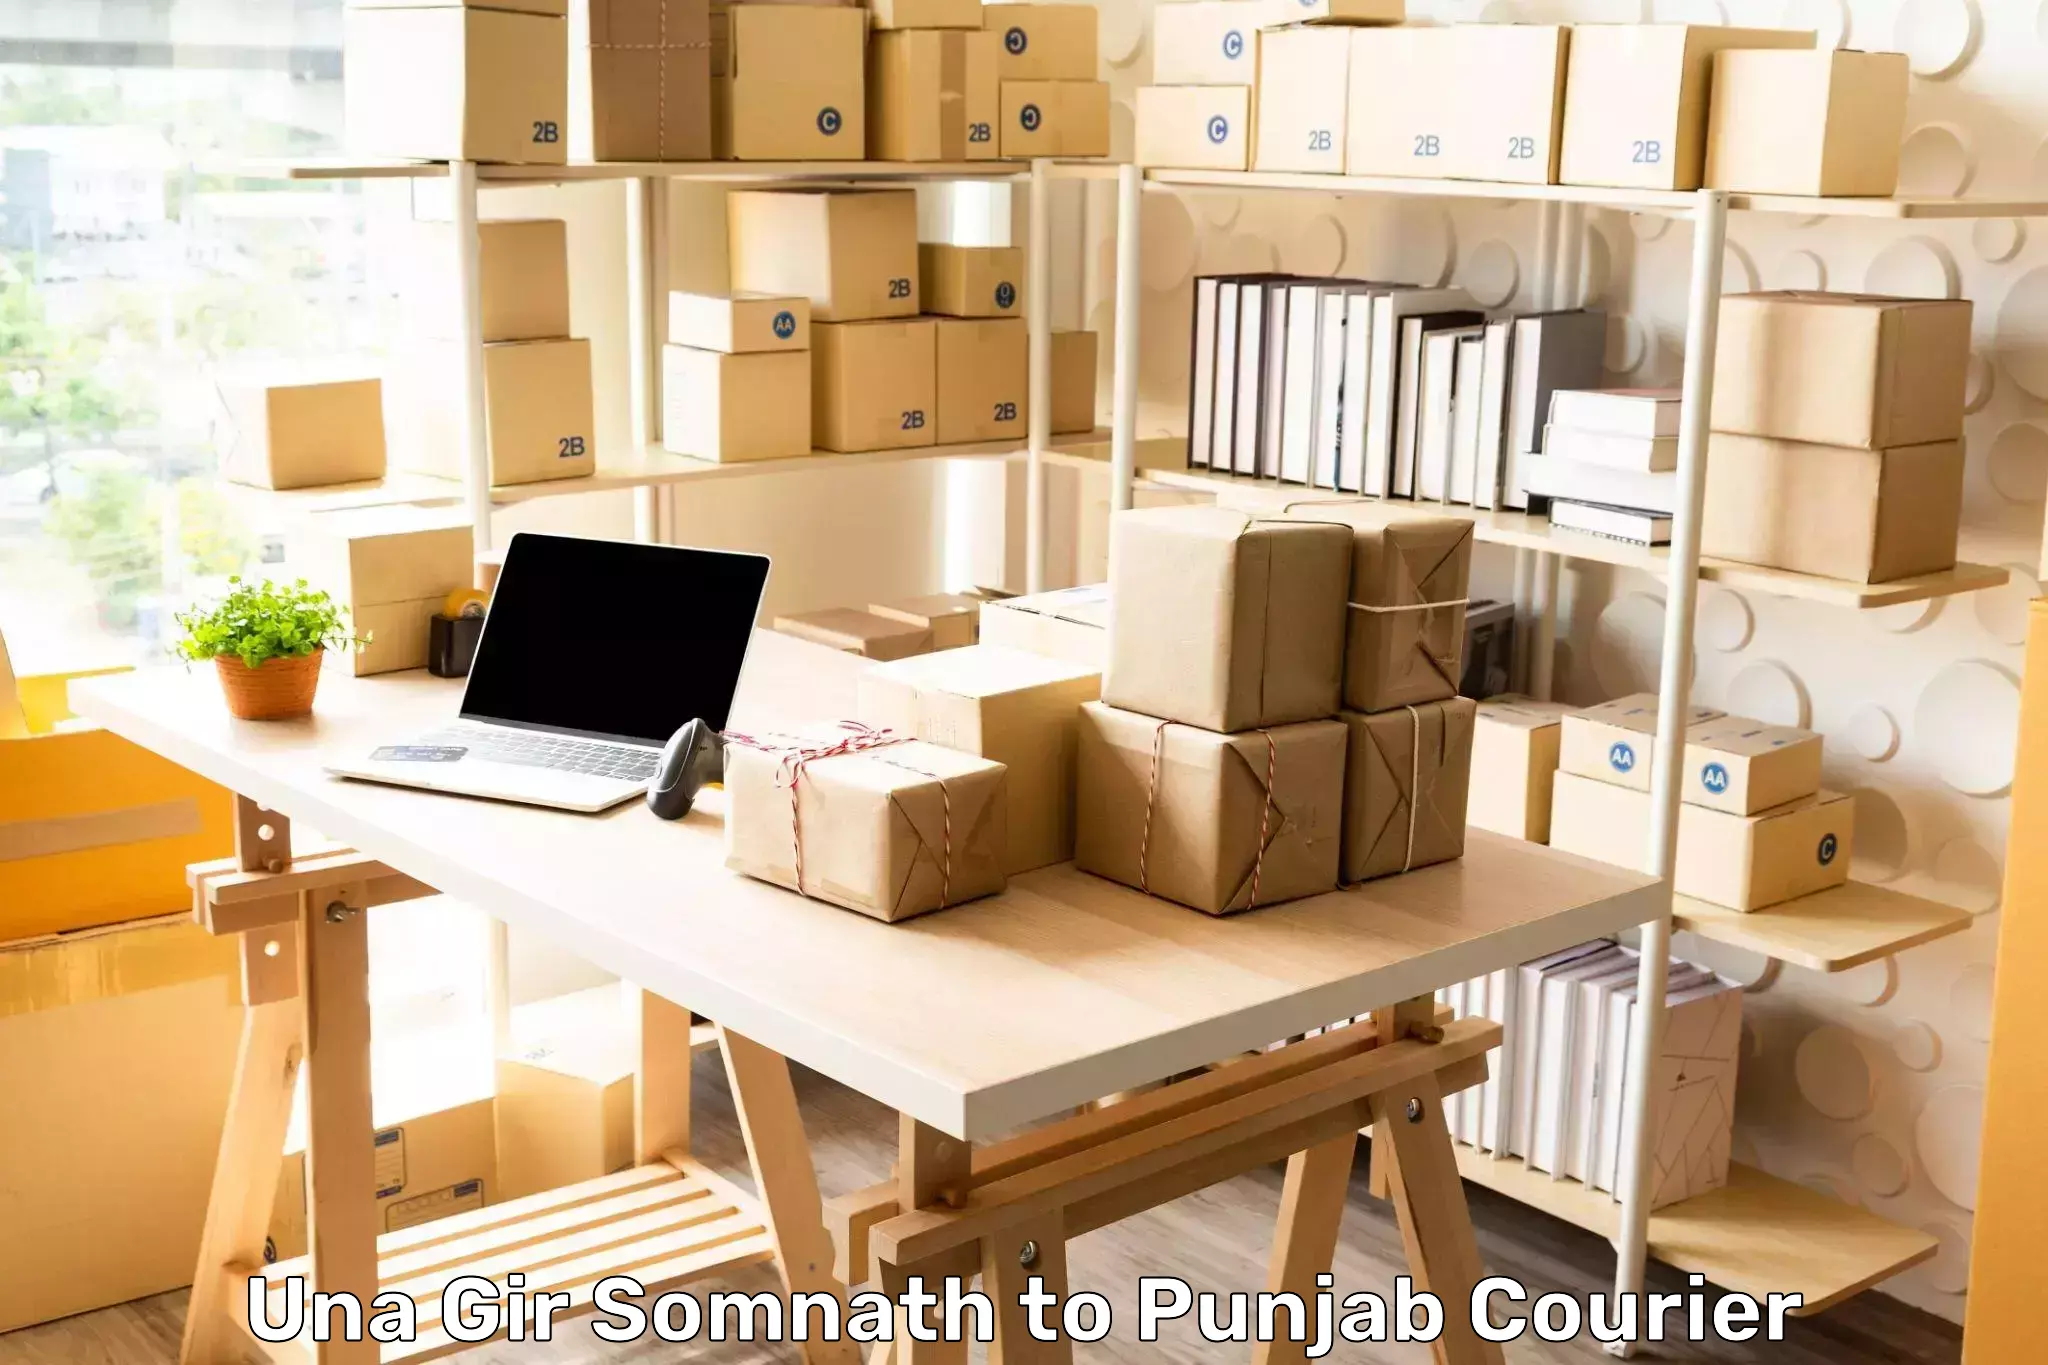 Residential courier service Una Gir Somnath to Bathinda